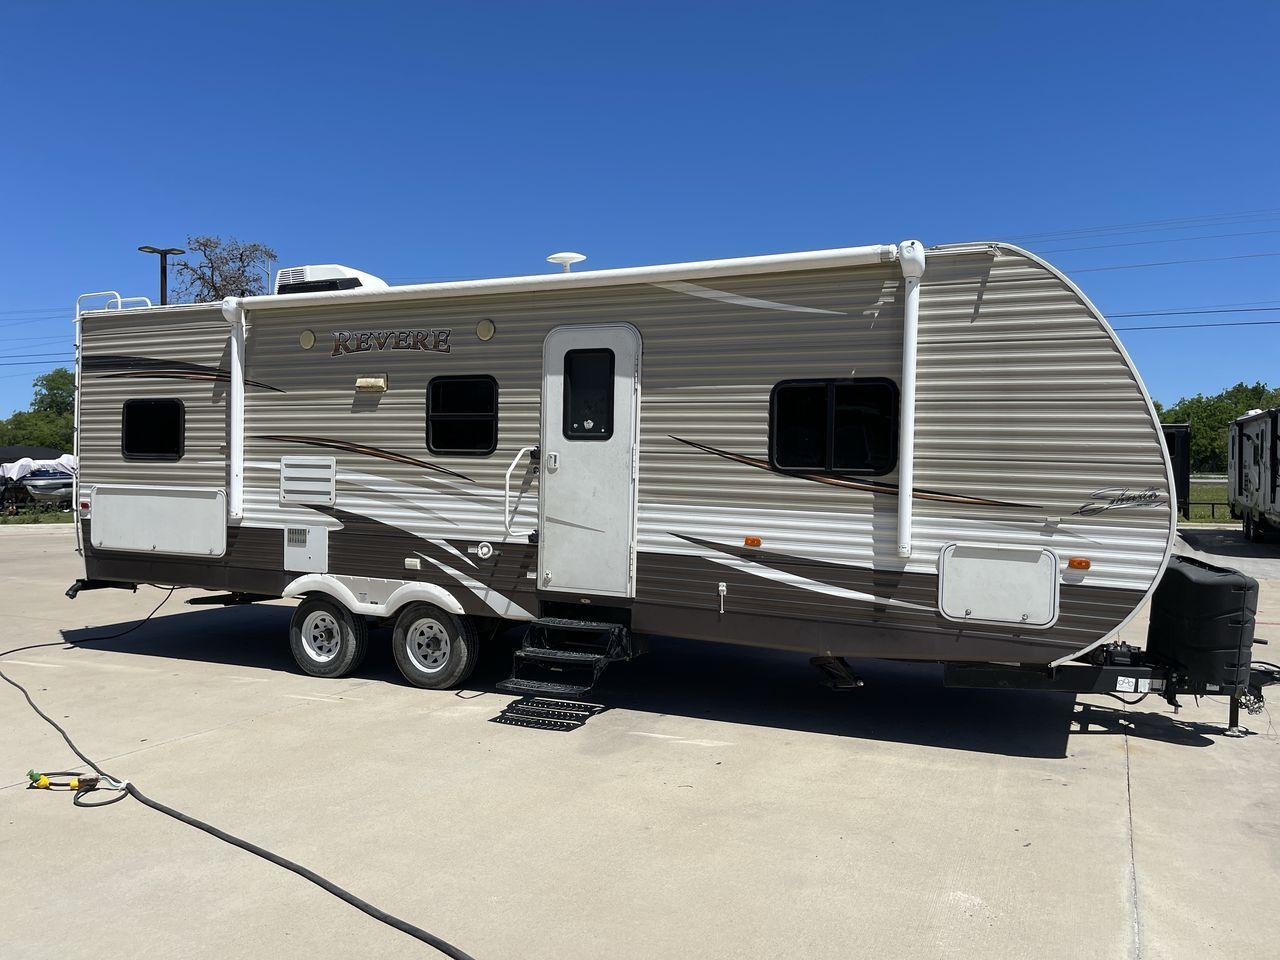 2017 TAN FOREST RIVER SHASTA REVERE (5ZT2SHSB1HE) , Length: 31.75 ft. | Dry Weight: 5,986 lbs. | Gross Weight: 9,404 lbs. | Slides: 1 transmission, located at 4319 N Main St, Cleburne, TX, 76033, (817) 678-5133, 32.385960, -97.391212 - This 2017 Forest River Shasta Revere Travel Trailer has dimensions of 31.9 ft. in length and seven ft. in height. It has a base weight of 5,986 lbs., a carrying capacity of 3,159 lbs, and a hitch weight of 604 lbs. It comes with one slideout and two axles. The door directly leads you to the combined - Photo #23